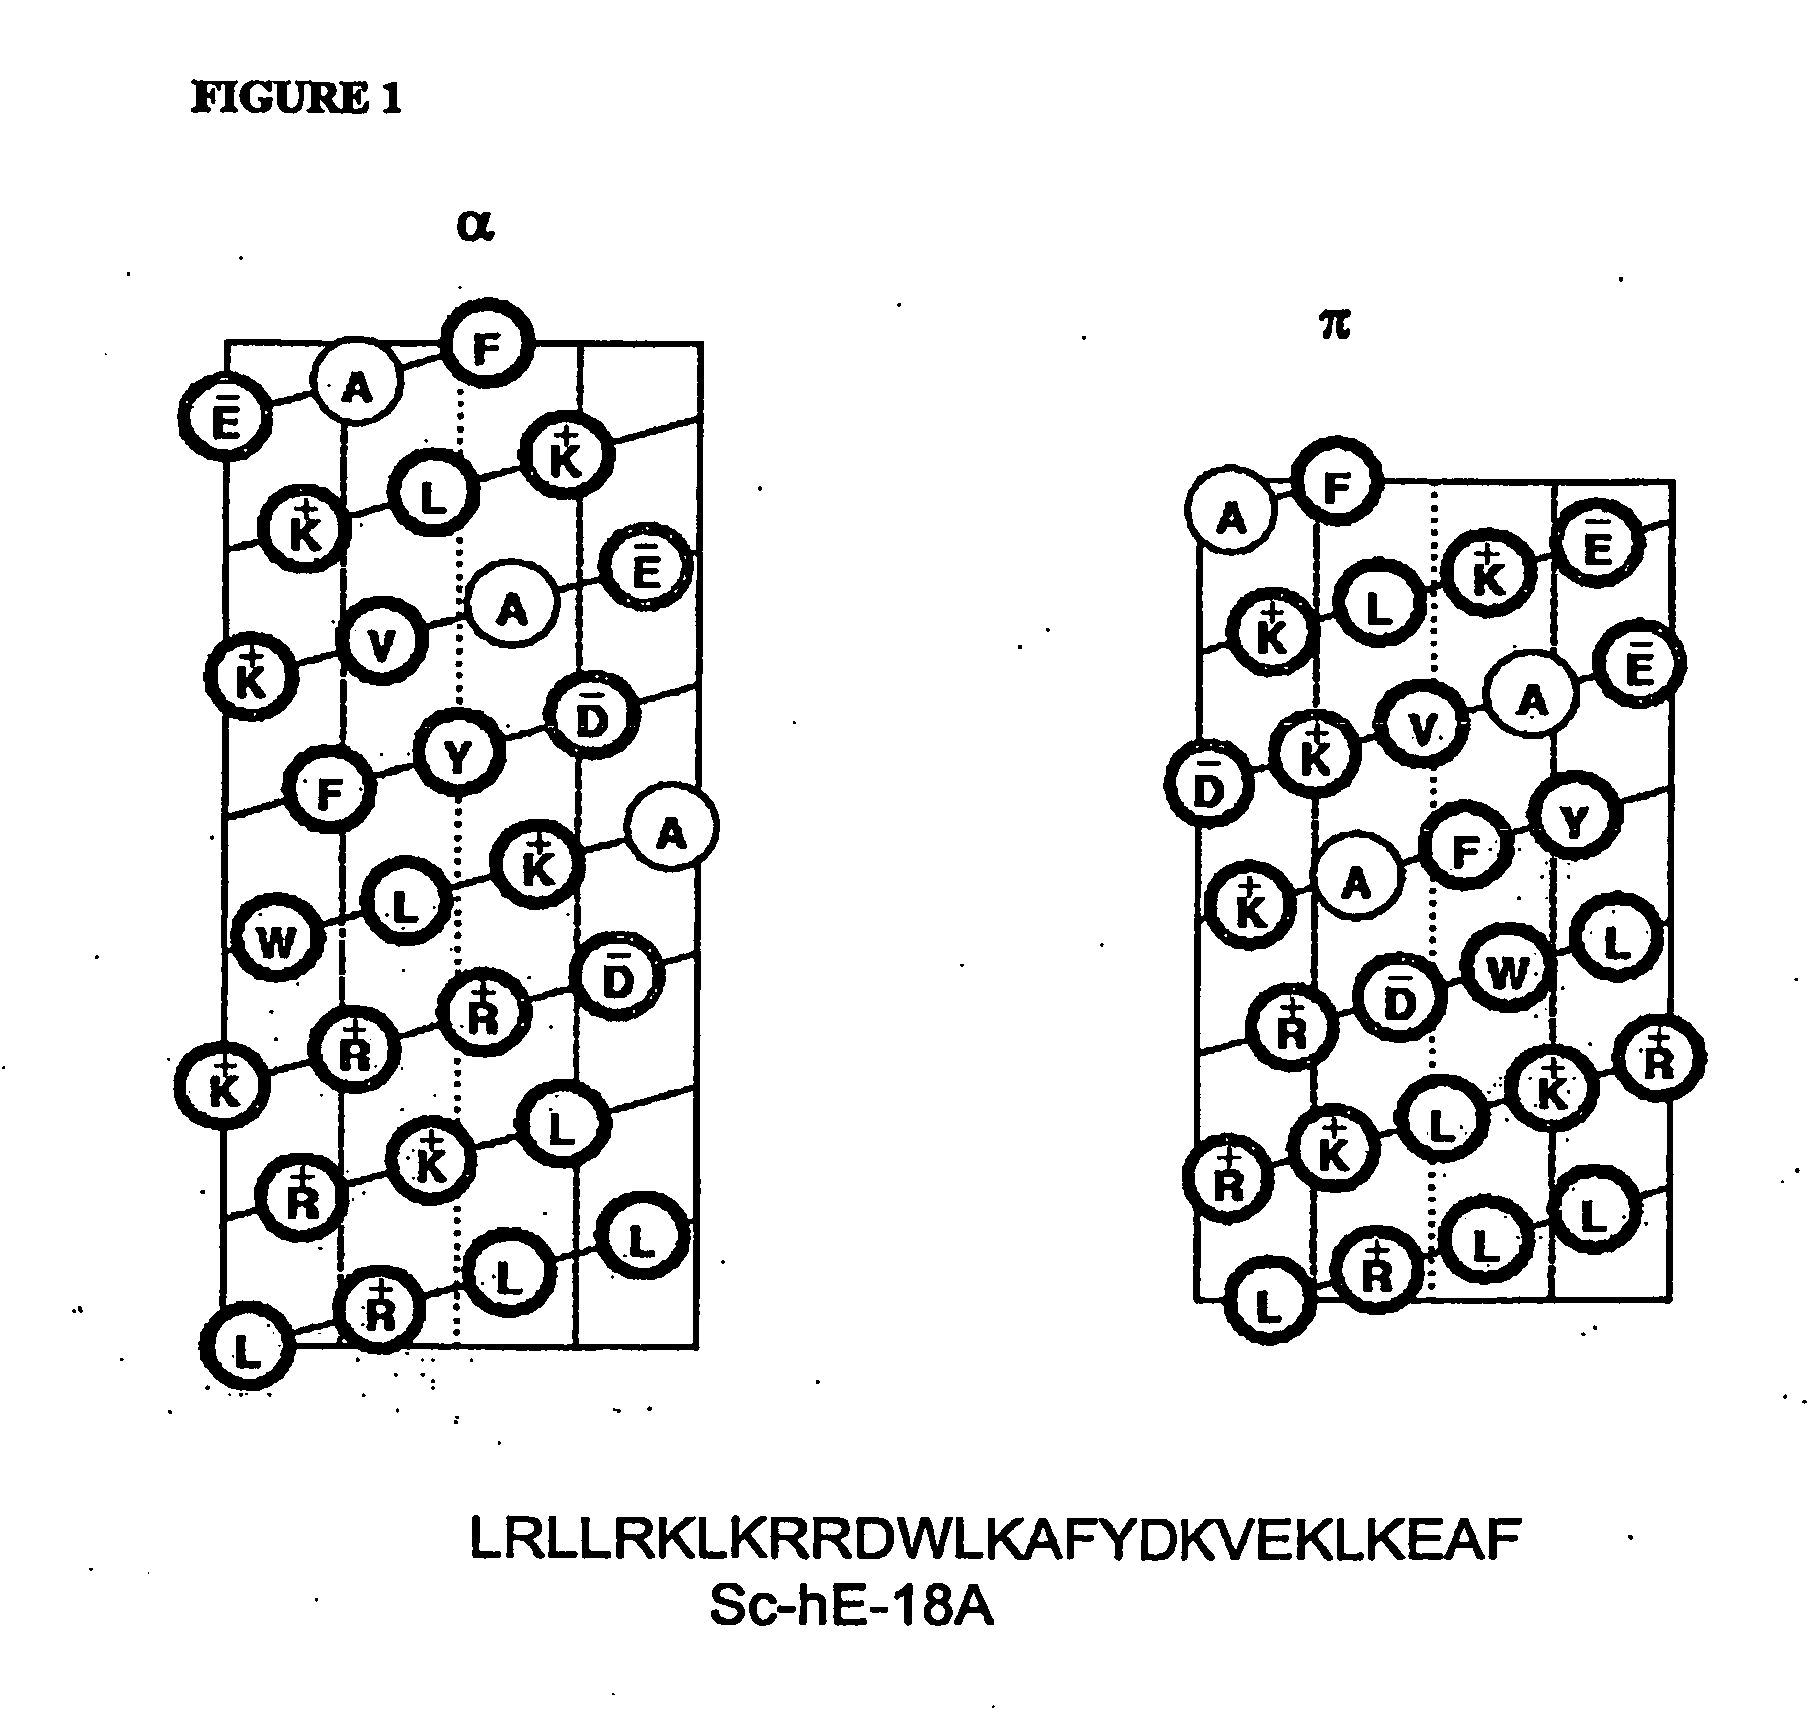 Synthetic apolipoprotein e mimicking polypeptides and methods of use